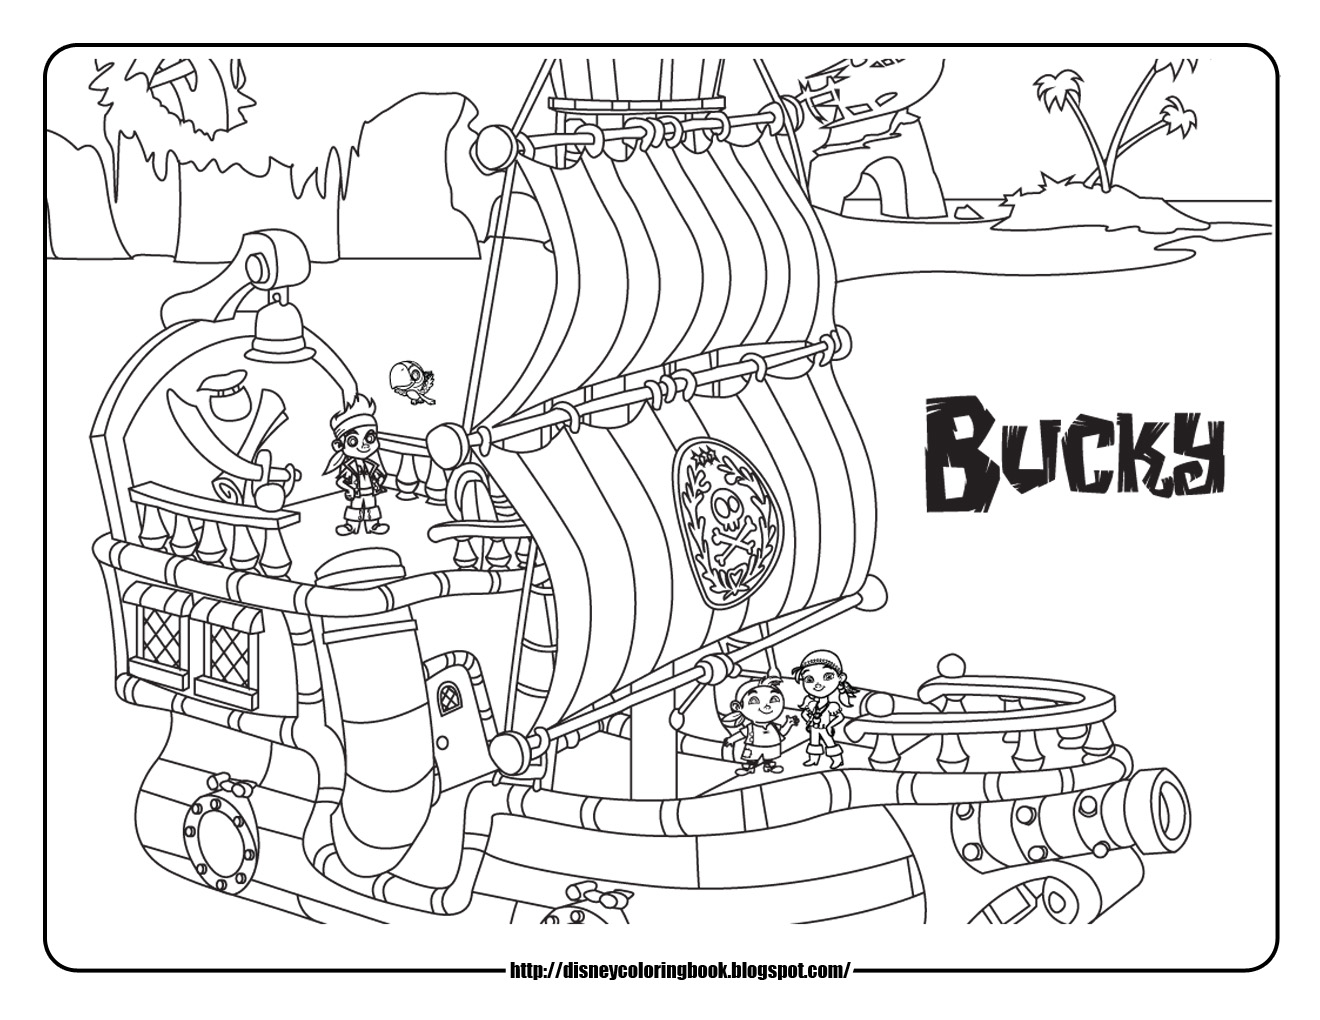 Disney coloring pages and sheets for kids jake and the neverland pirates free disney coloring sheets